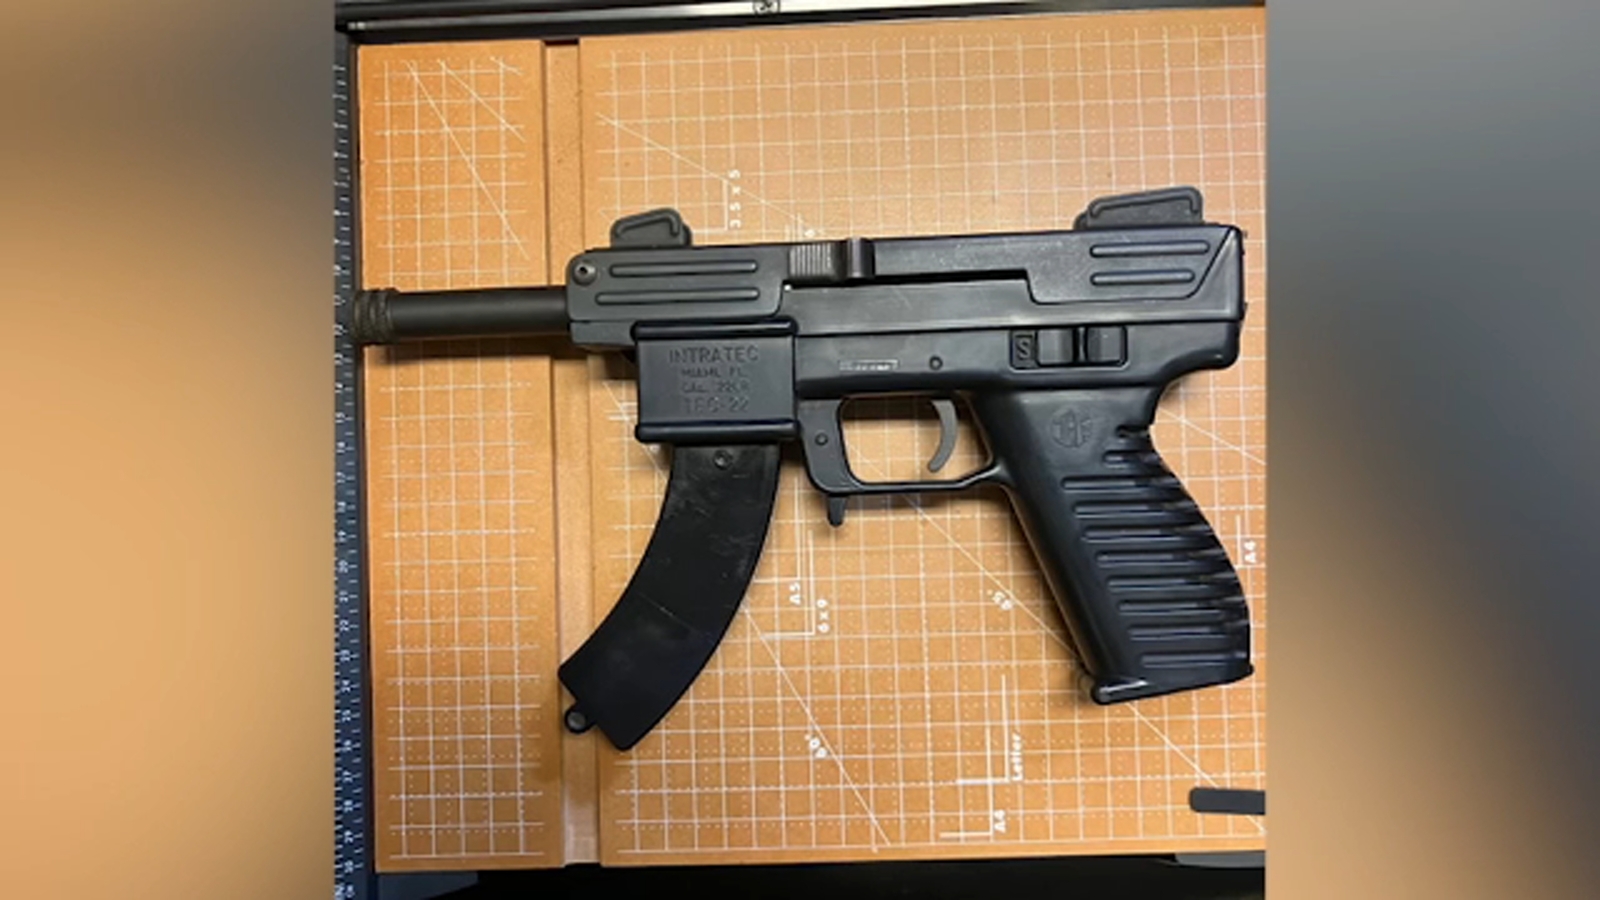 Police recover loaded semi-automatic weapon from teen inside Brooklyn subway station